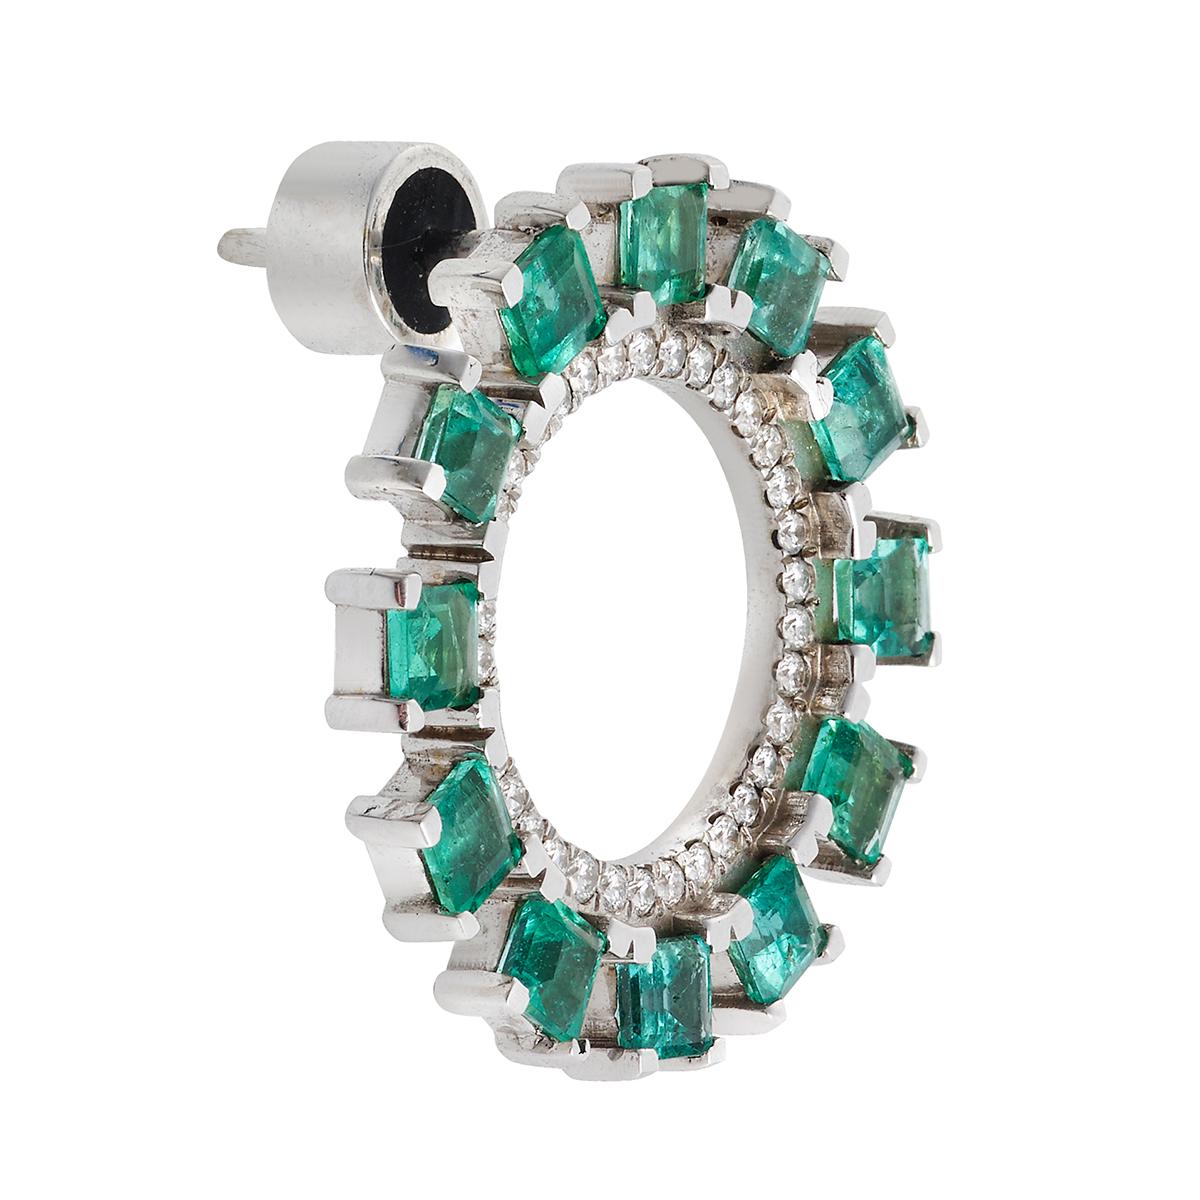 Sculpted into a cutout circle that resembles a shining sun, these polished 18k white gold Glimmer Sun stud earrings sparkle with a central champagne-diamond-encrusted ring framed by square emerald 